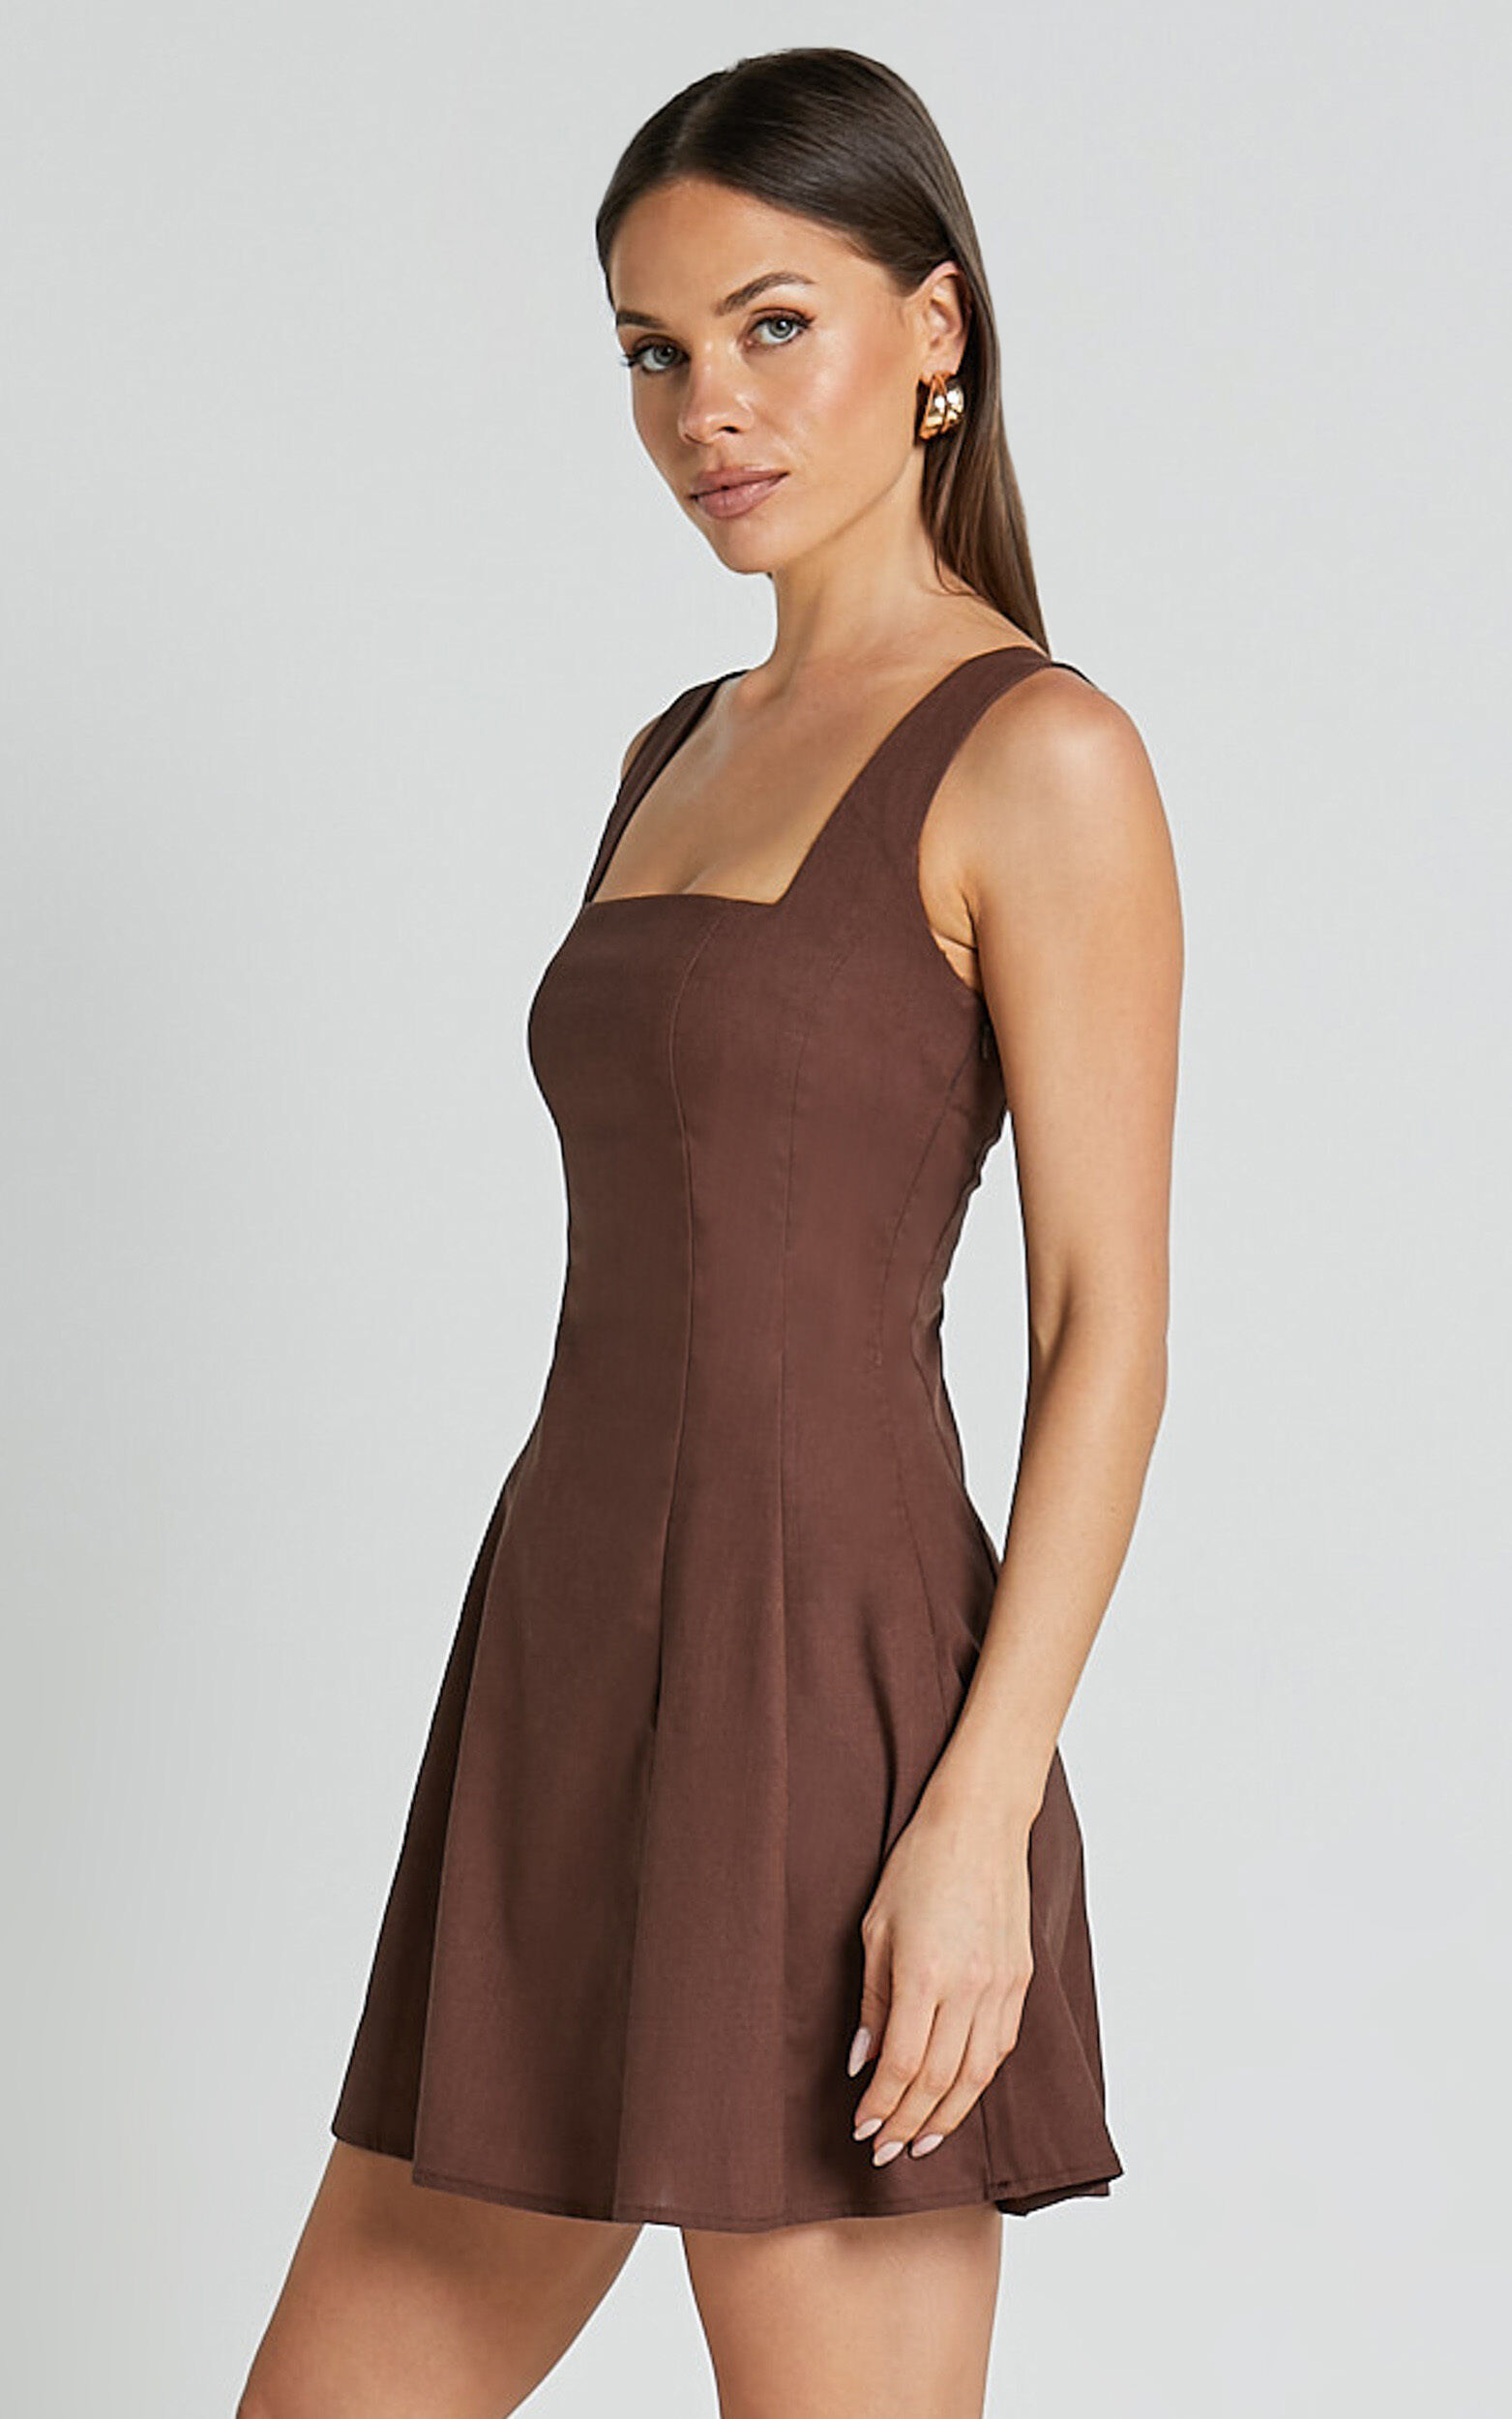 Adiana_Mini_Dress_-_Linen_Look_Square_Neck_Shirred_Back_A_Line_Dress_in_Chocolate_0008